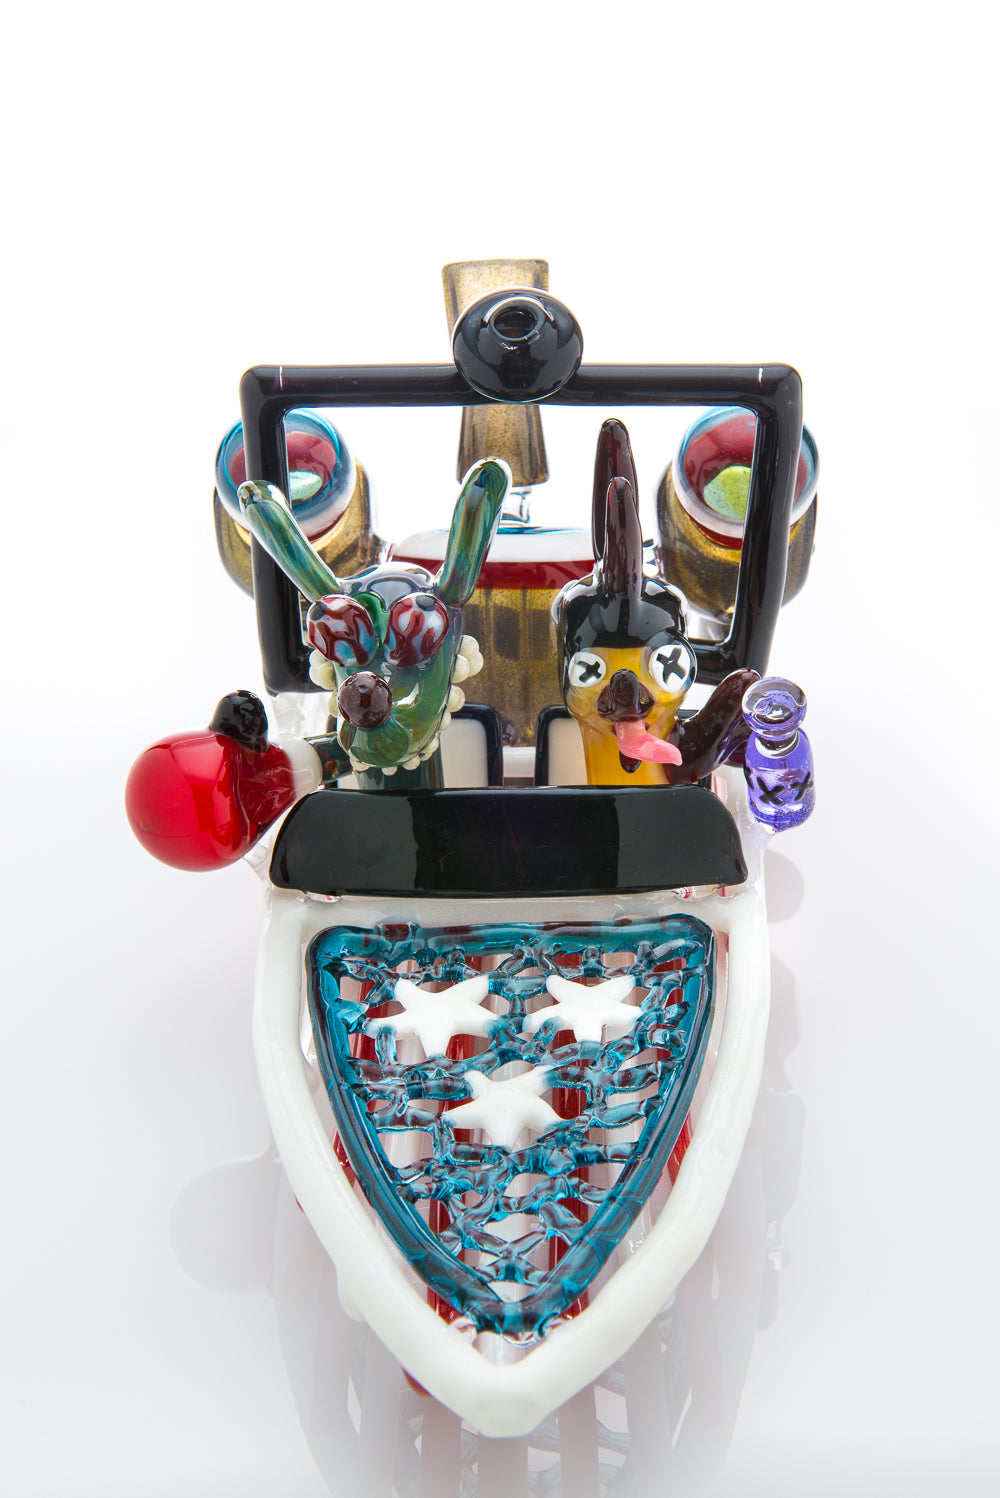 Illuzion Glass Galleries' 2014 July 4th First Friday Collaboration Vapor Bubbler by Hoobs, Hops, and JOP